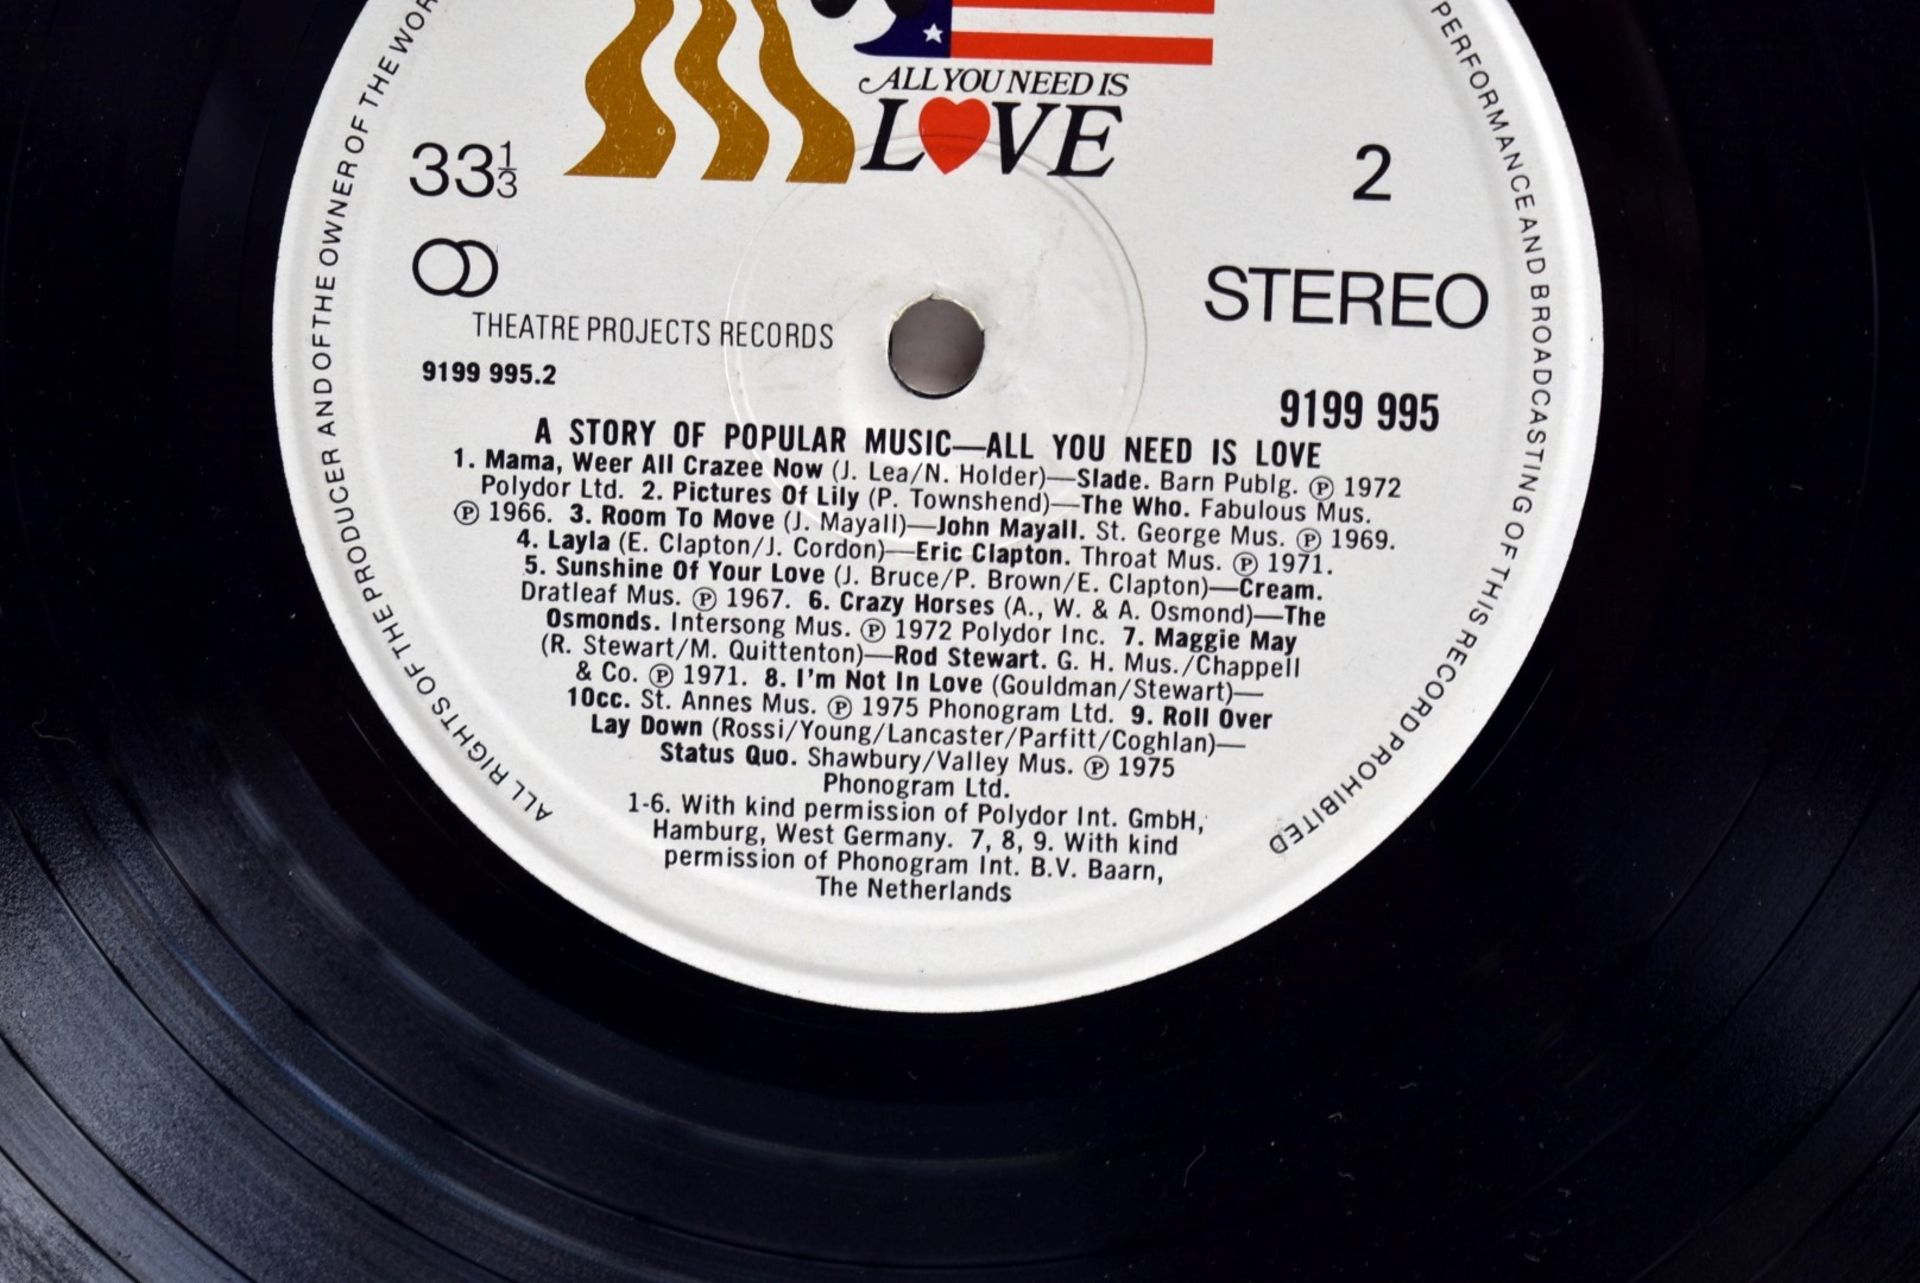 1 x A Story Of Popular Music, 20 Original Recordings by Theatre Projects Records 2 Sided 12 Inch - Image 17 of 17